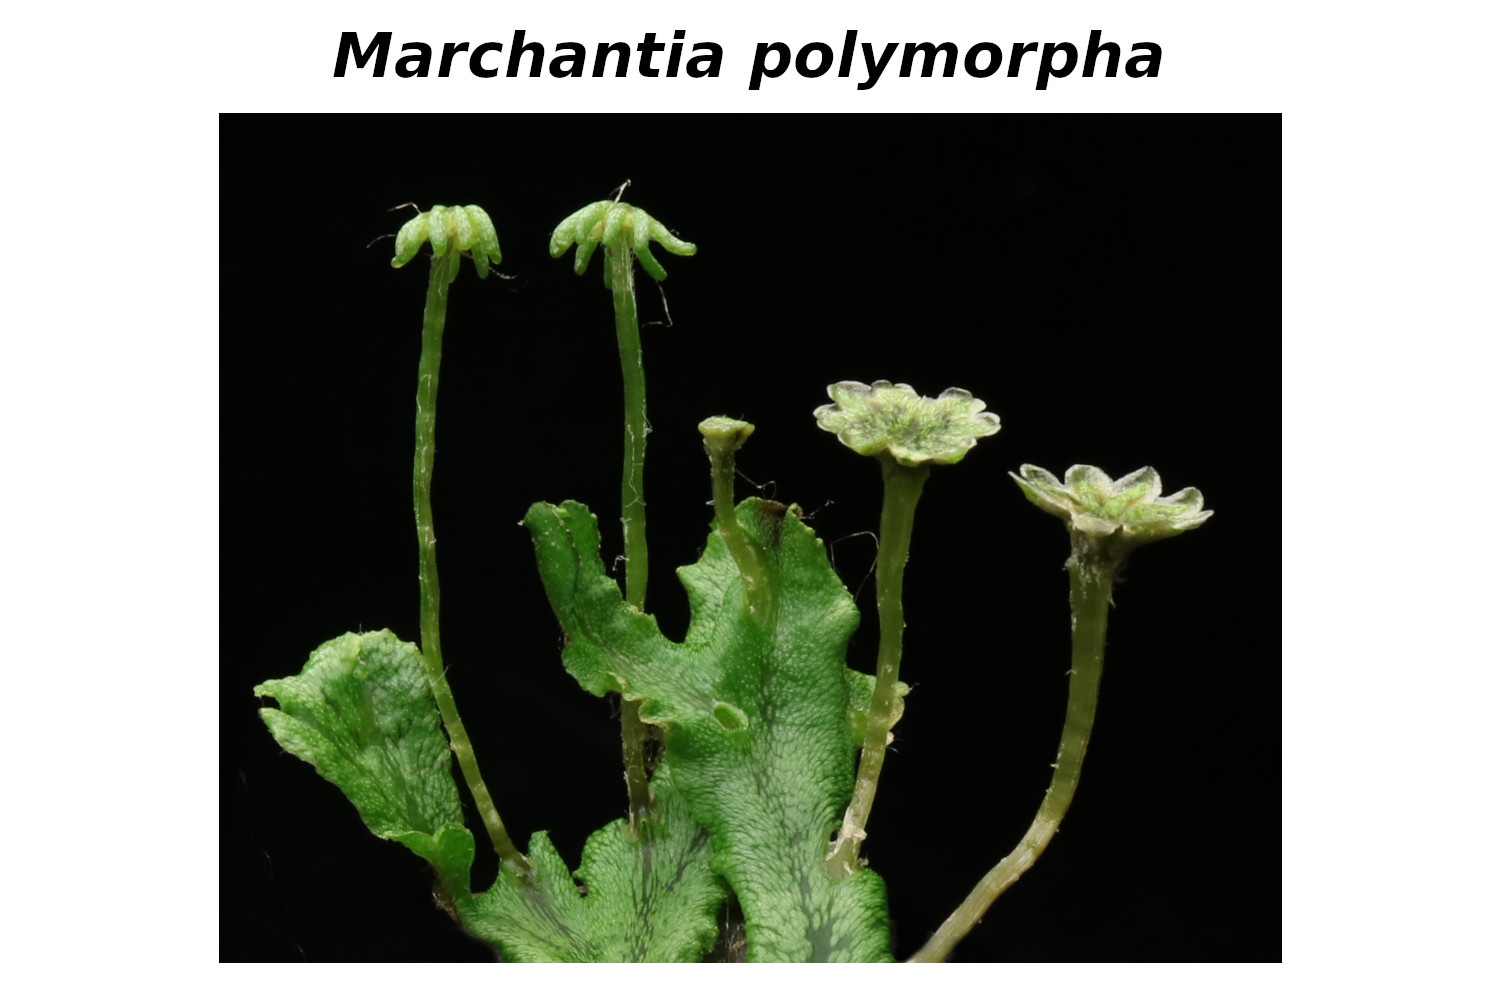 Genome sequence analysis of Marchantia polymorpha revealed that almost all land plant transcription factor families already exist in this basal land plant - but with lower gene numbers per family. <br>Bowman et al. (Marchantia Genome consortium); Cell, 2017